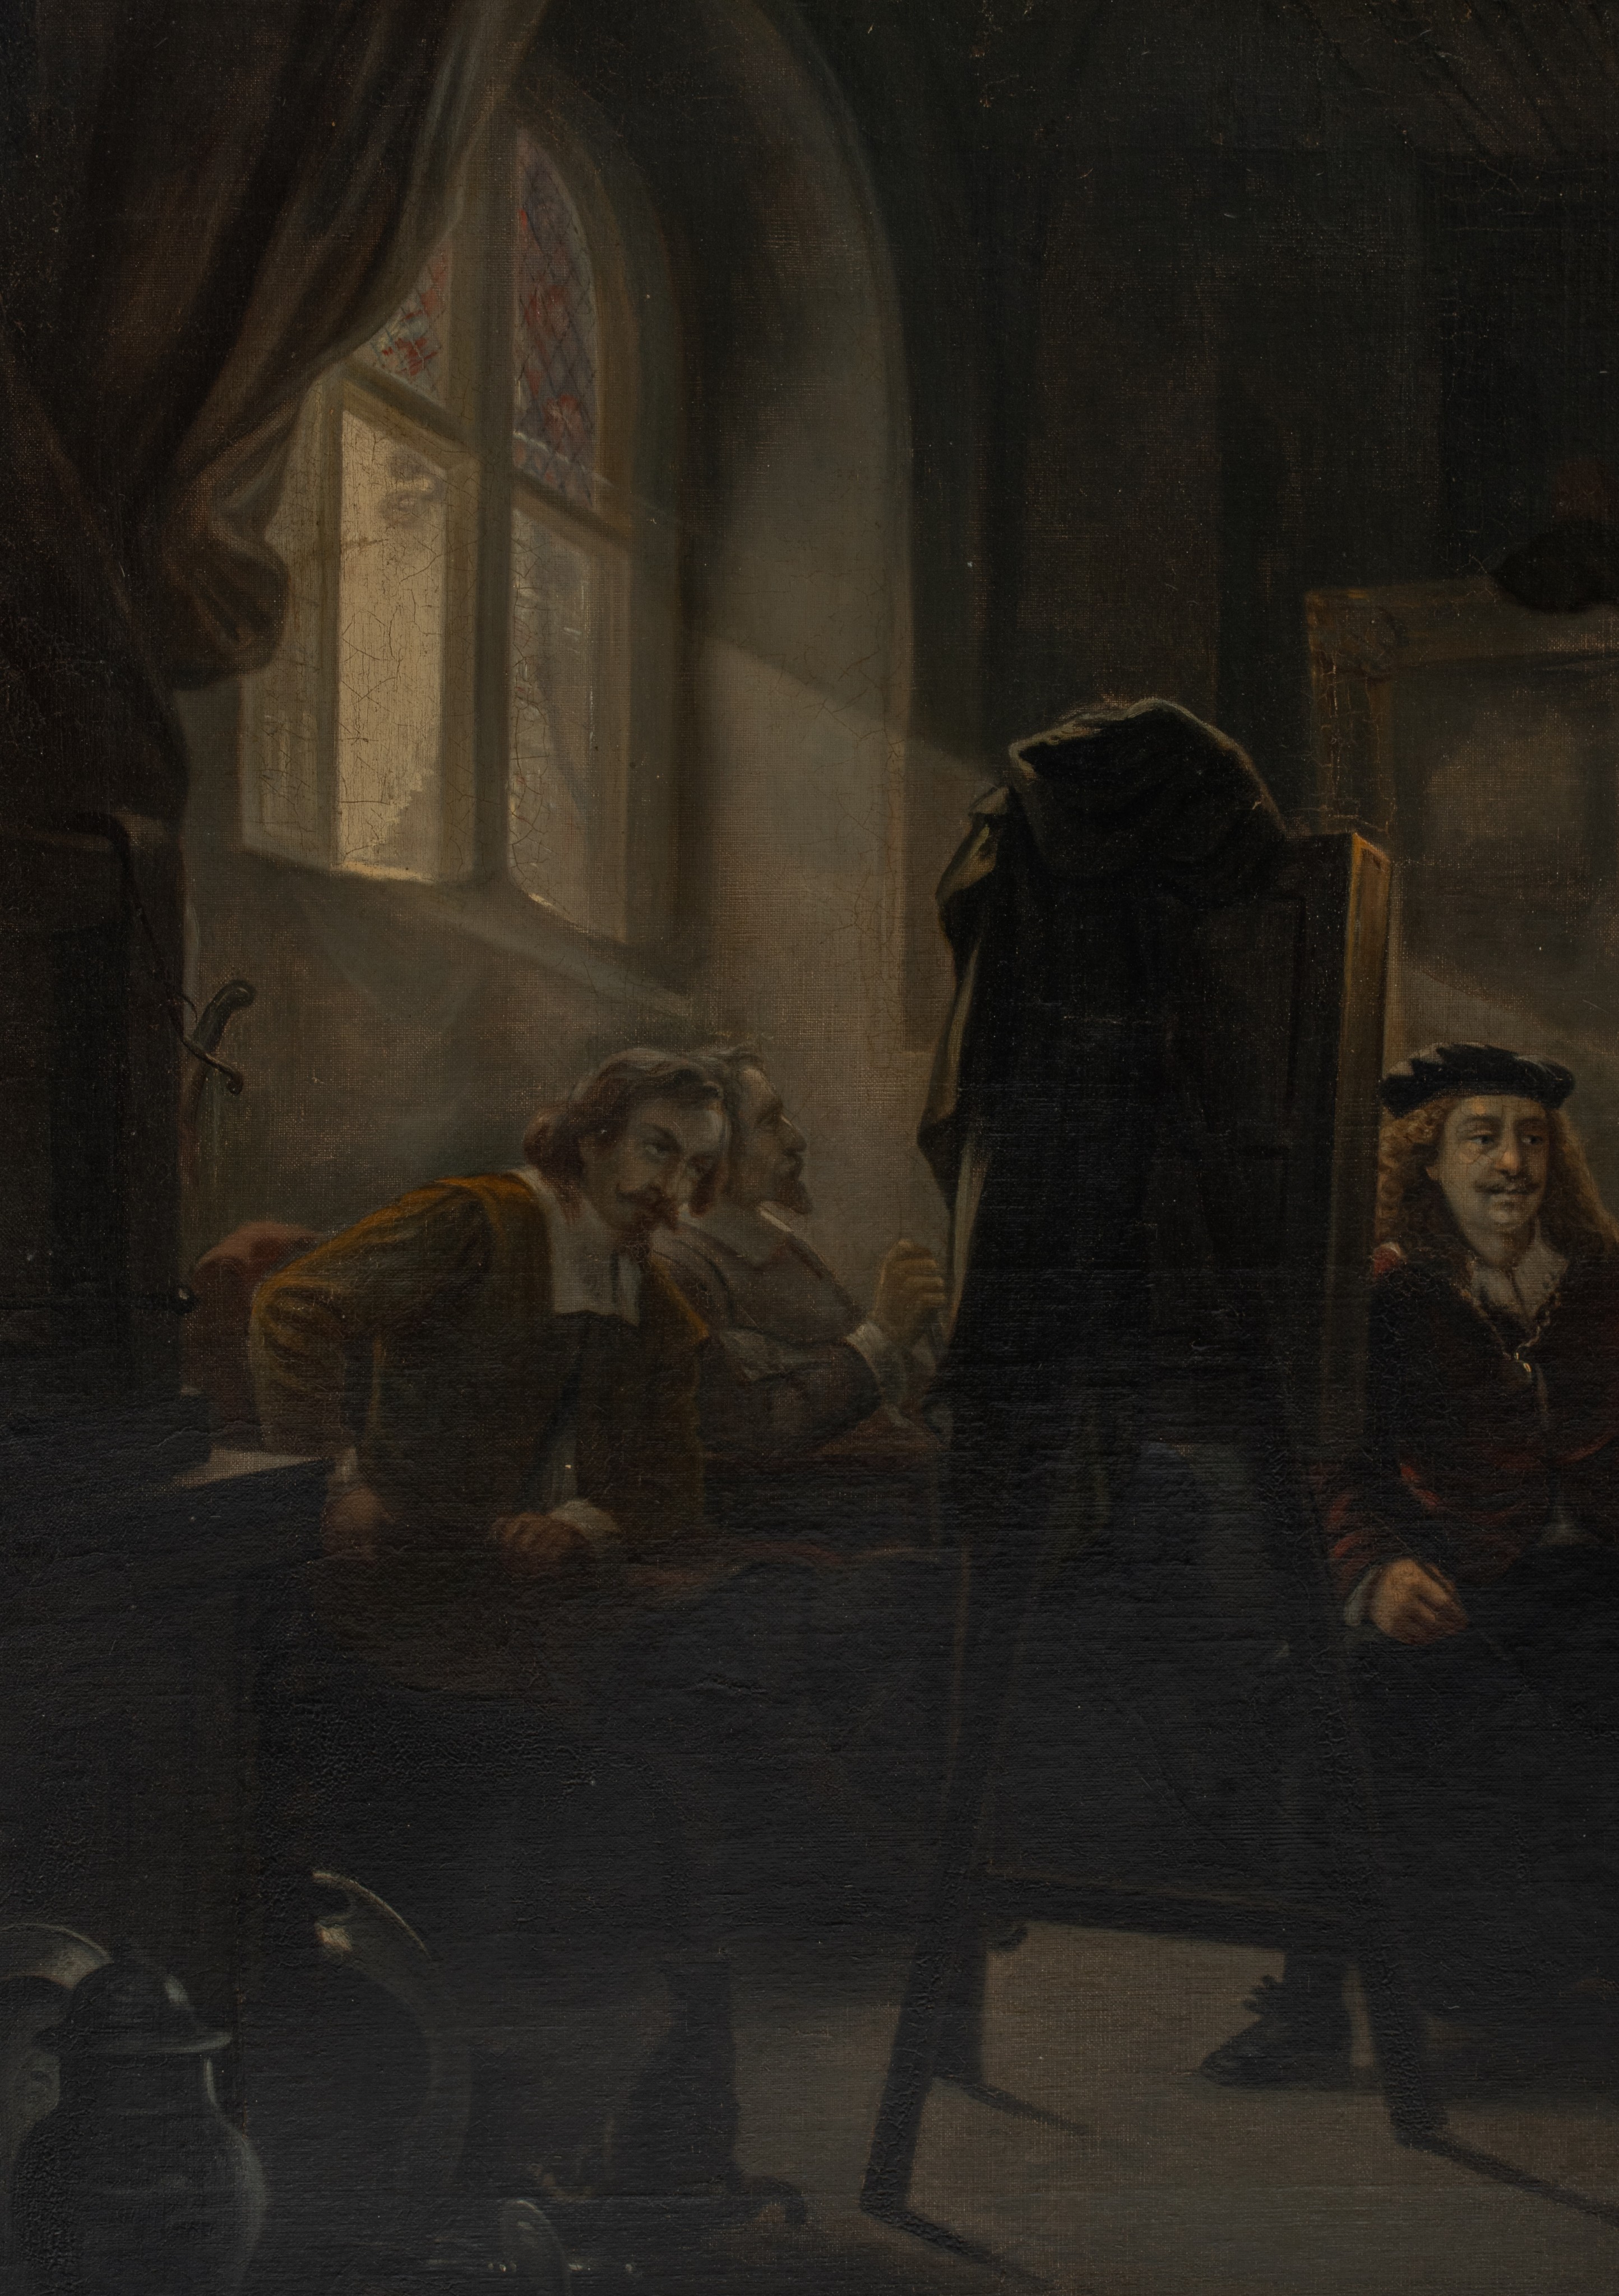 Rembrandt van Rijn creating another masterpiece in his workshop, 19thC, oil on canvas, 84 x 145 cm - Image 4 of 6